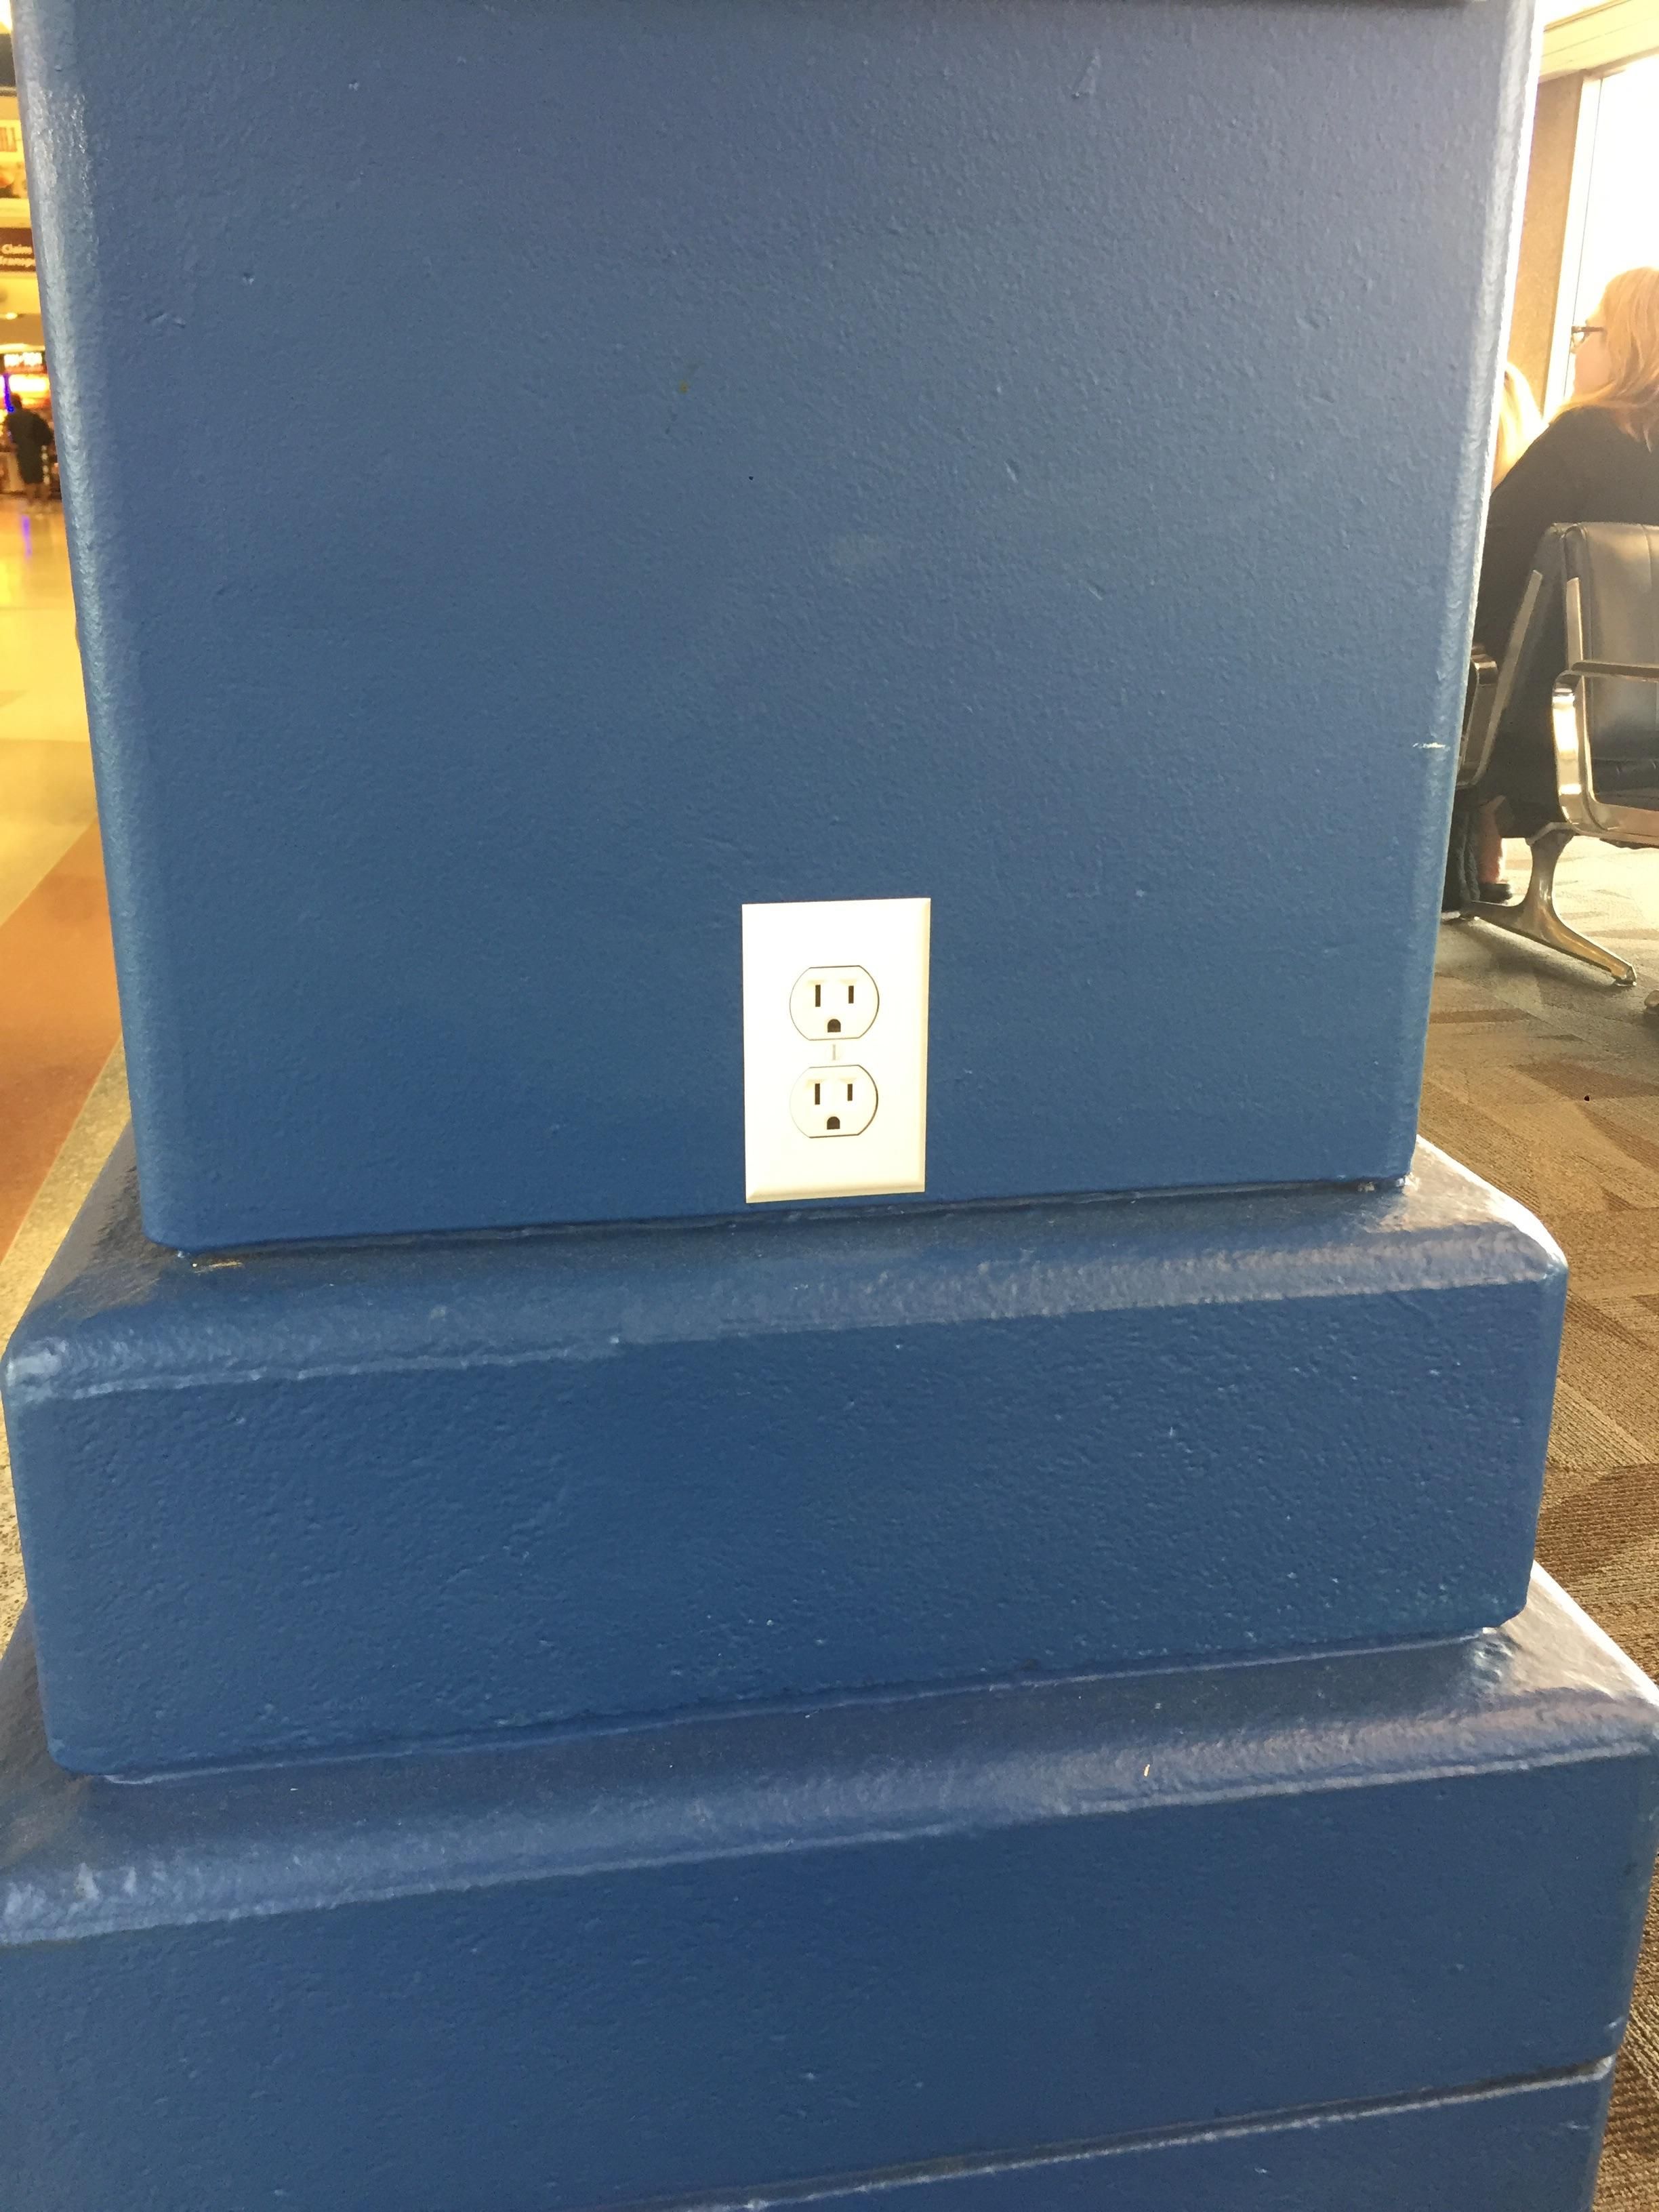 Outlet sticker at Cleveland Airport. I have watched 5 people in the past 30 minutes try to use it...